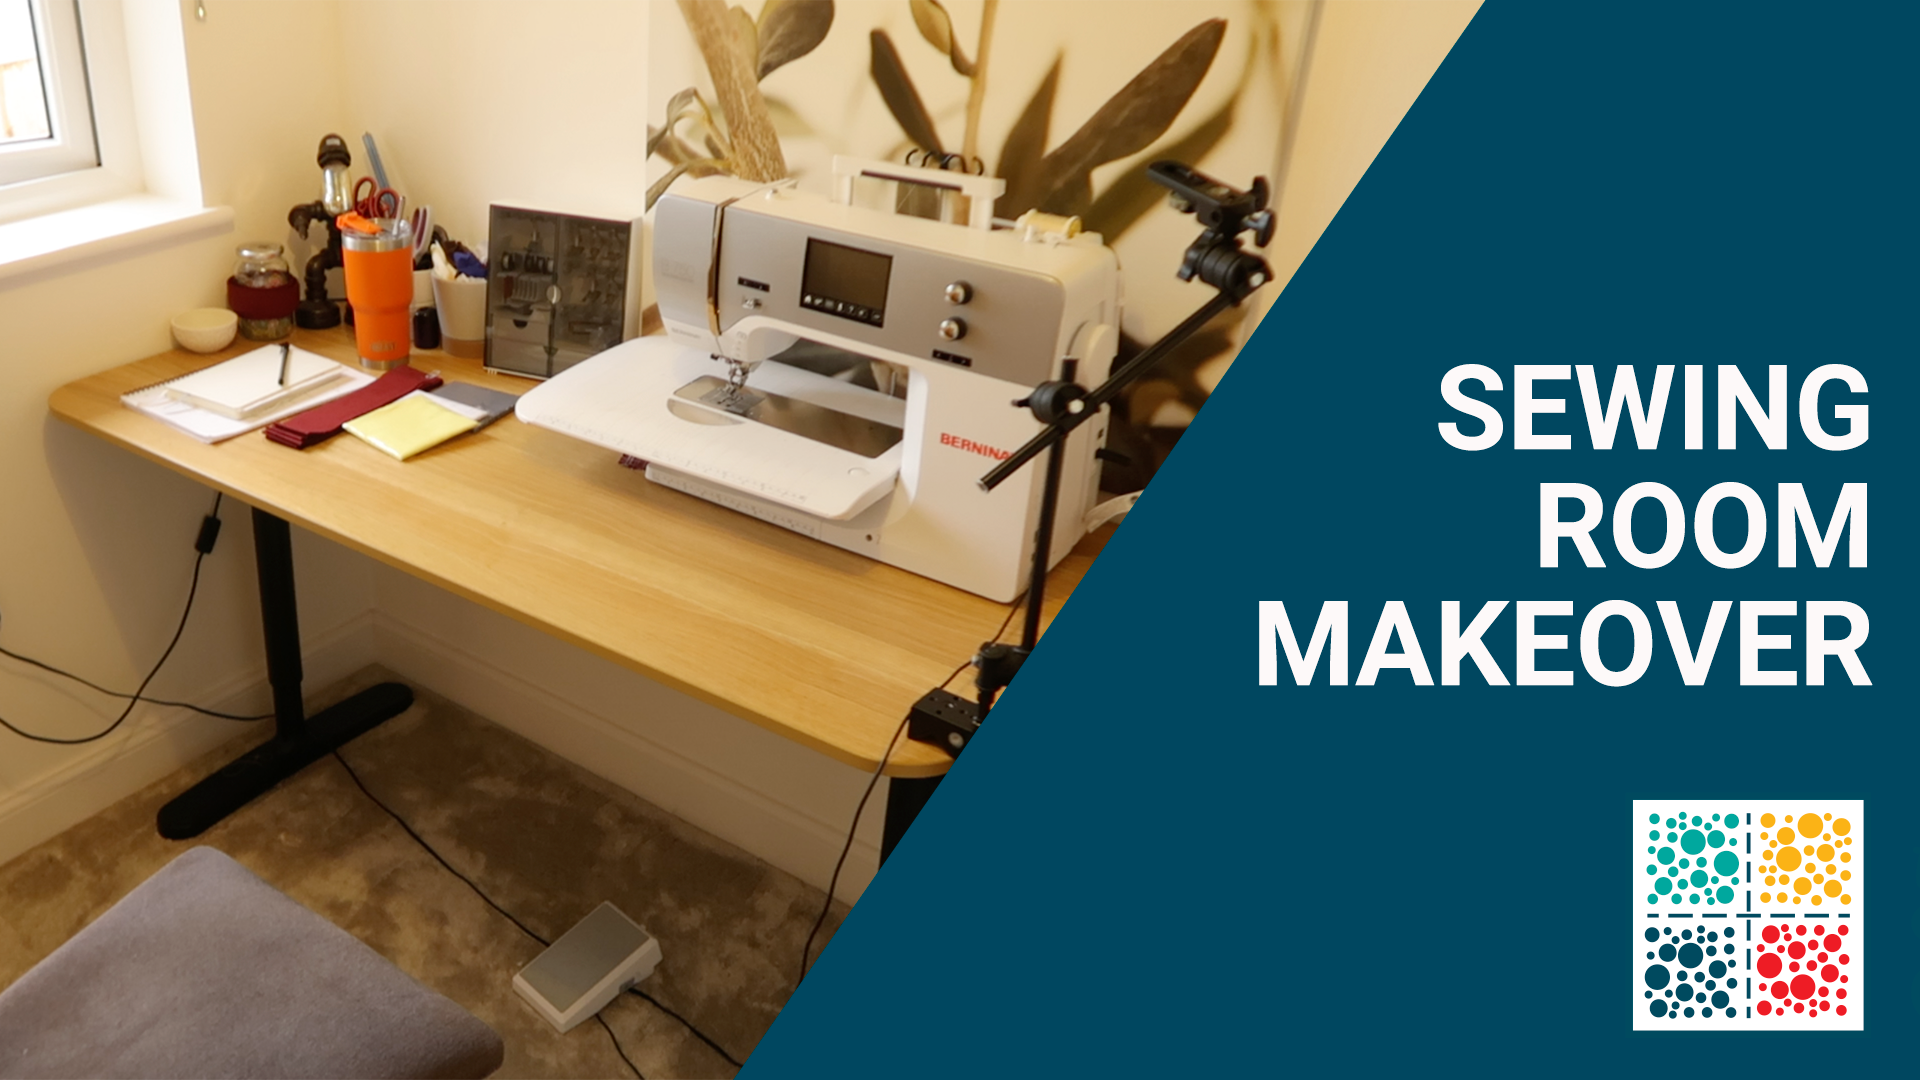 Sewing Room Tour and Makeover 2020 – Part 1